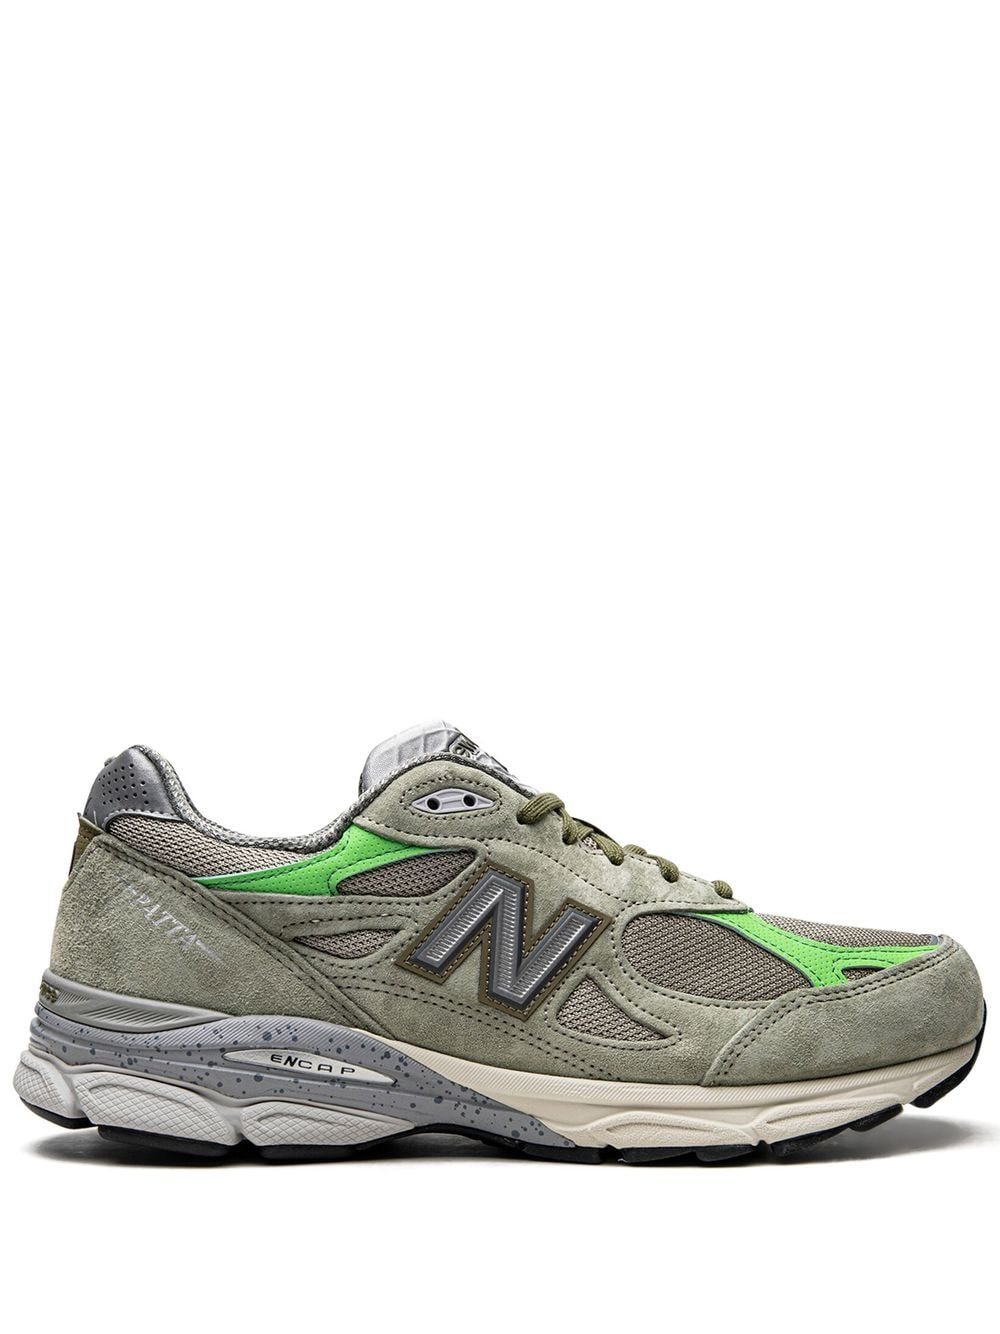 New Balance x Patta 990v3 low-top sneakers - Green